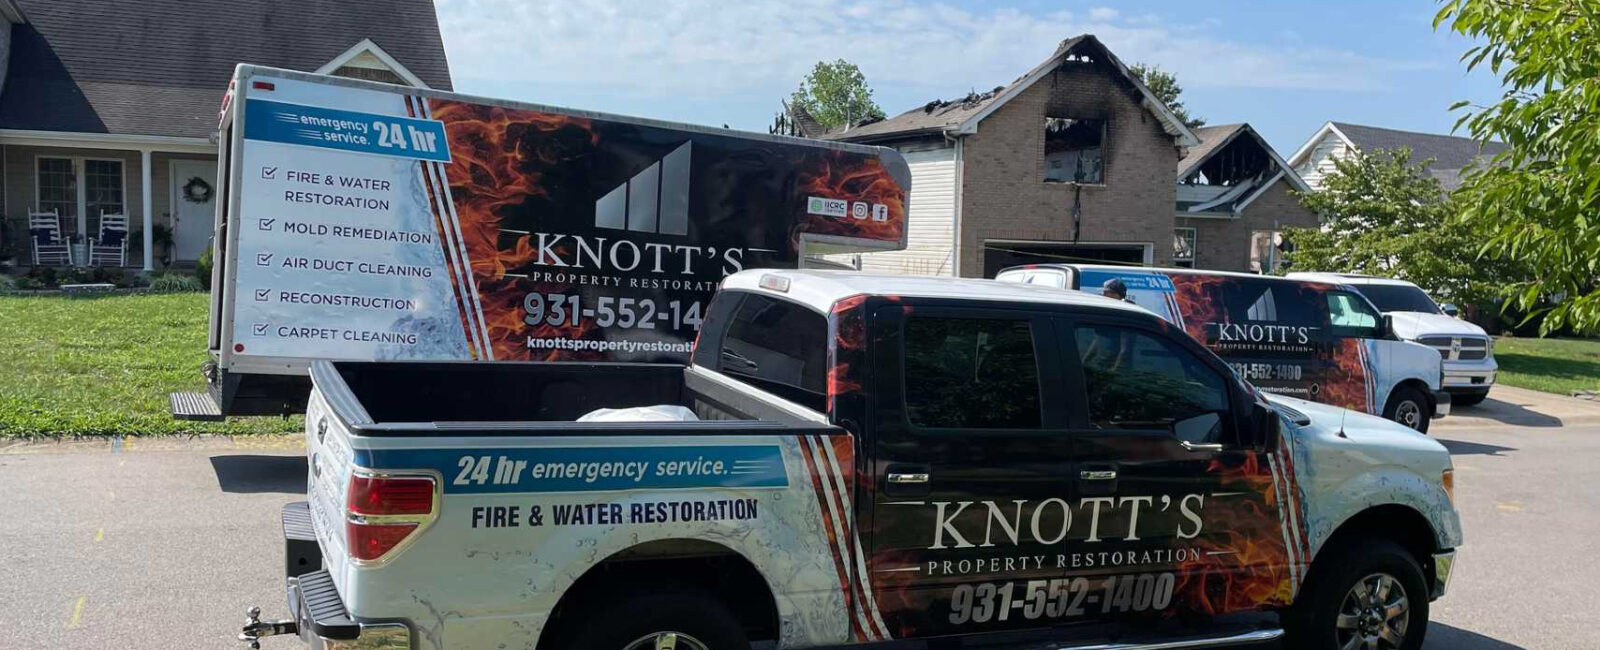 Knott's Property Restoration team assisting local home residence Clarksville, Tennessee fire damage restoration